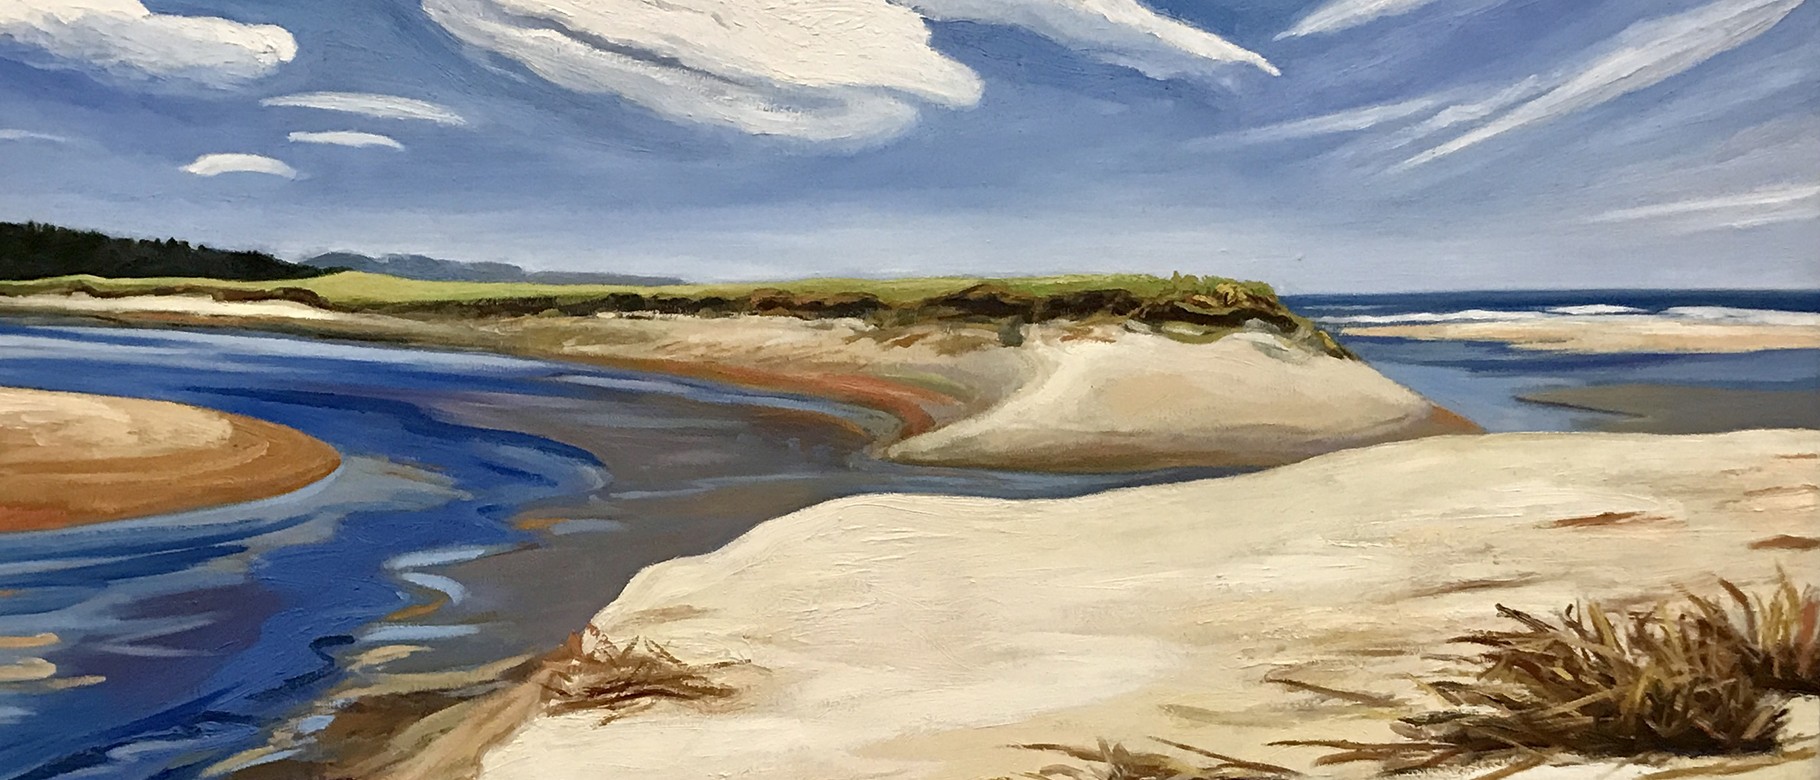 Landscape painting of water and sand dunes, entitled "The Breach," by Adrienne LaVallee